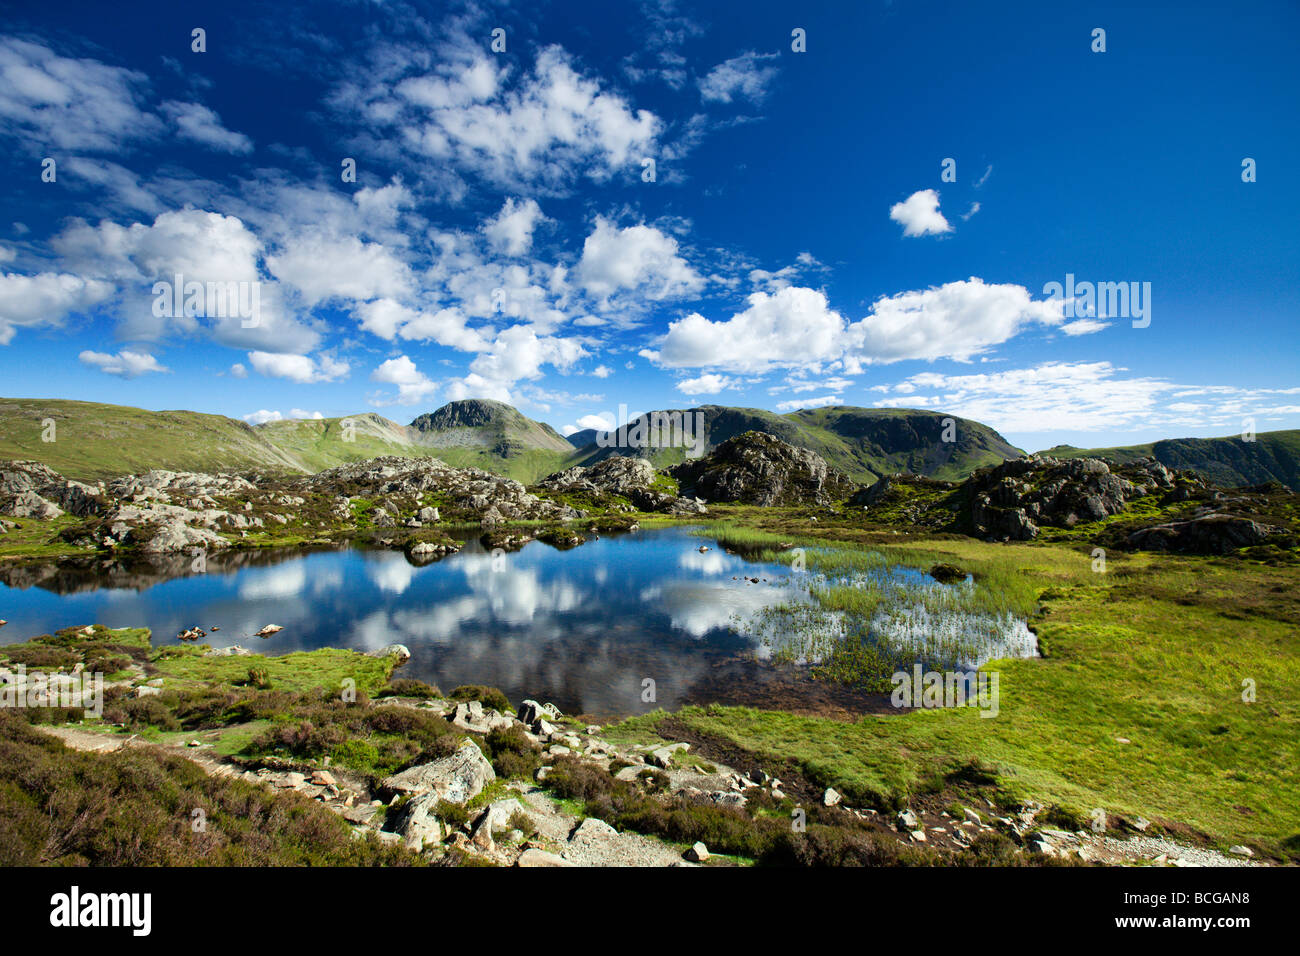 Innominate Tarn On Haystacks Mountain With 'Great Gable' And 'Kirk Fell' In The Distance 'The Lake District' Cumbria England UK Stock Photo